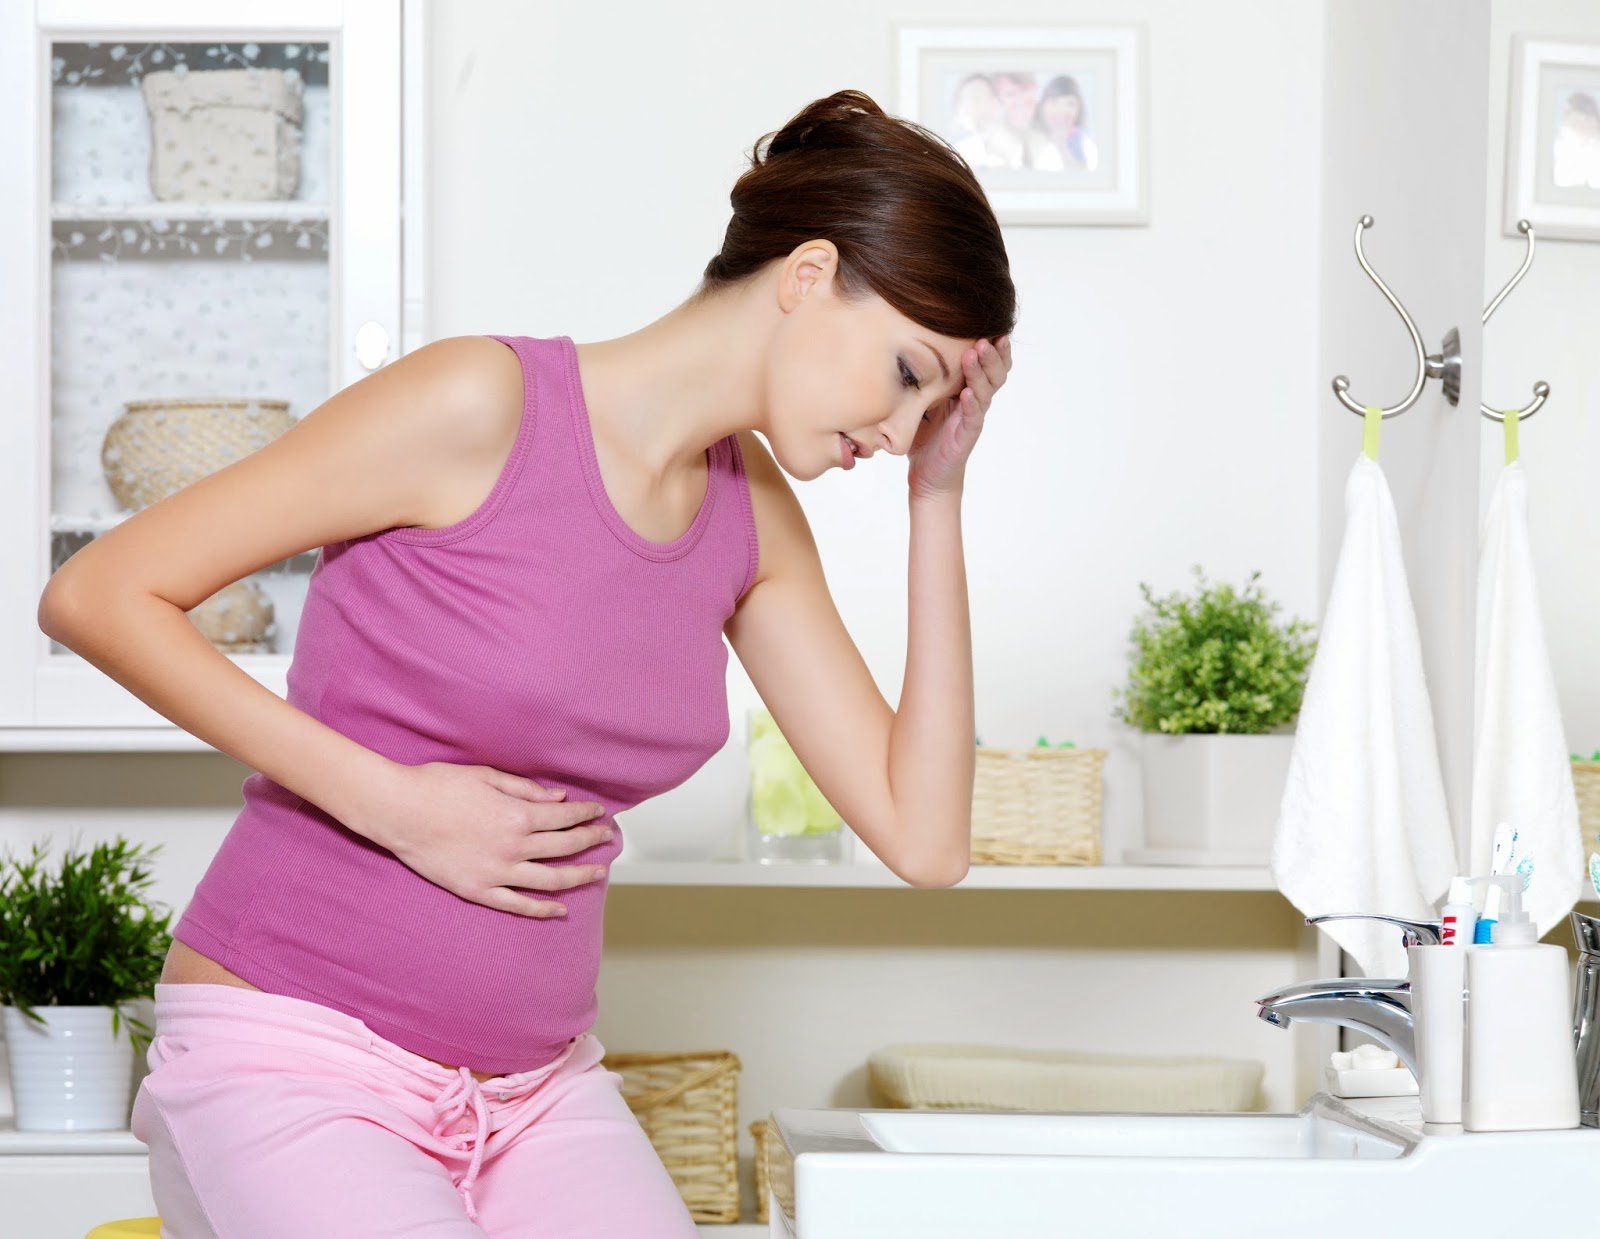 Capital Osteopathy: Why is my stomach so bloated and painful?